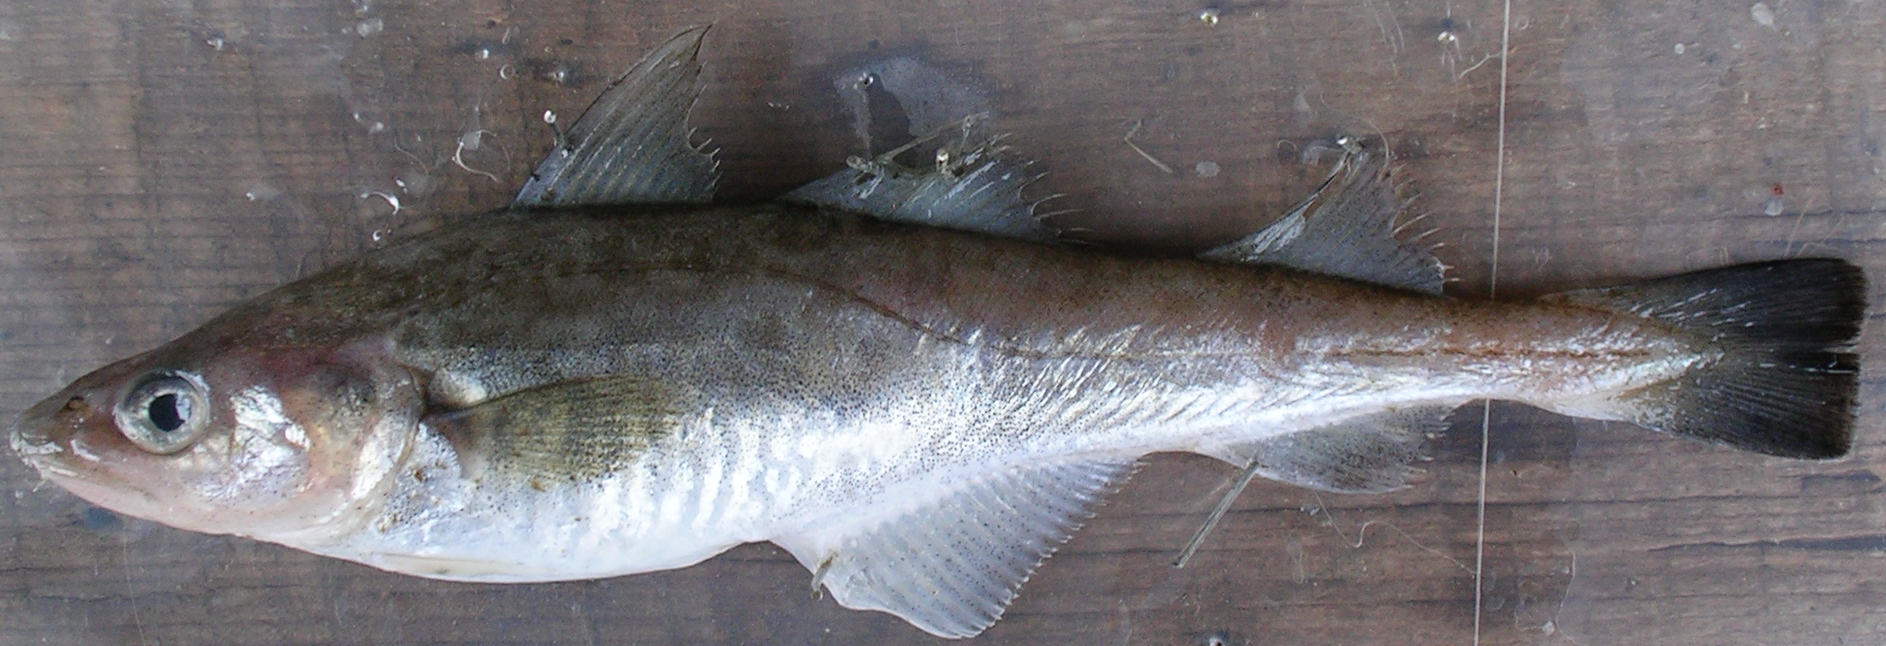 pacific tomcod.bmp